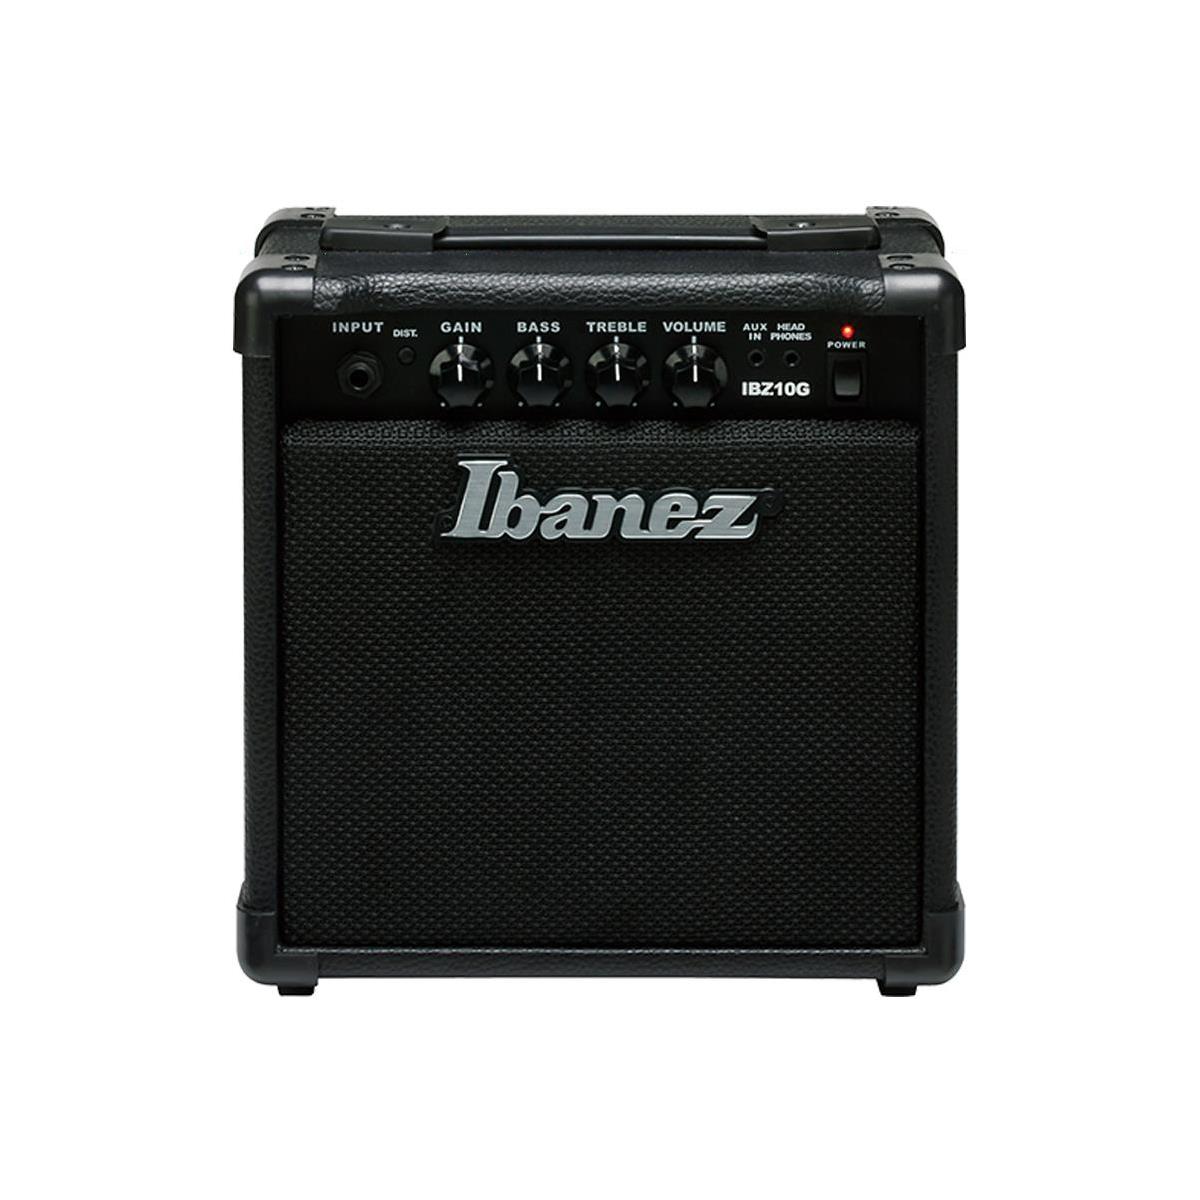 Ibanez IBZ10G 10W 6.5" Guitar Combo Amplifier $50 + free s/h at Adorama